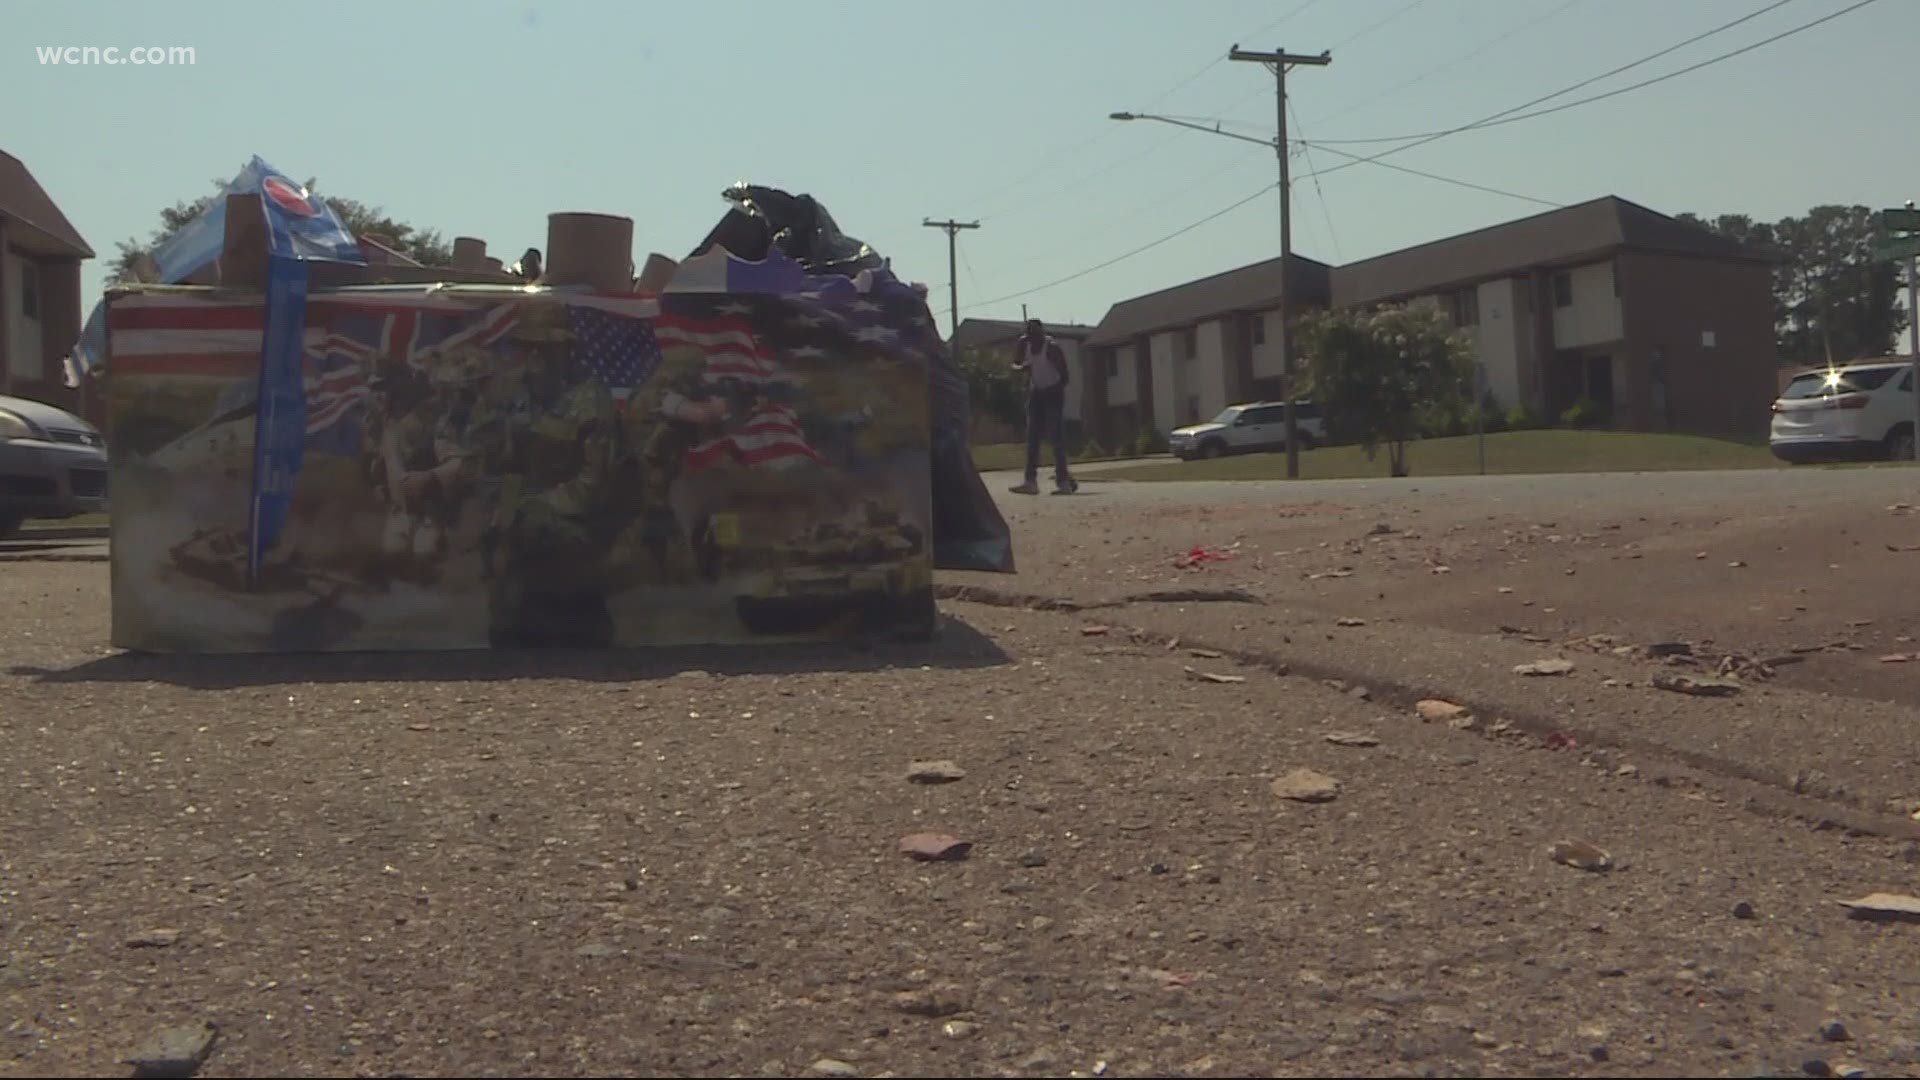 Brandon Goldner learns how the community united to clean up the damage done by fireworks.